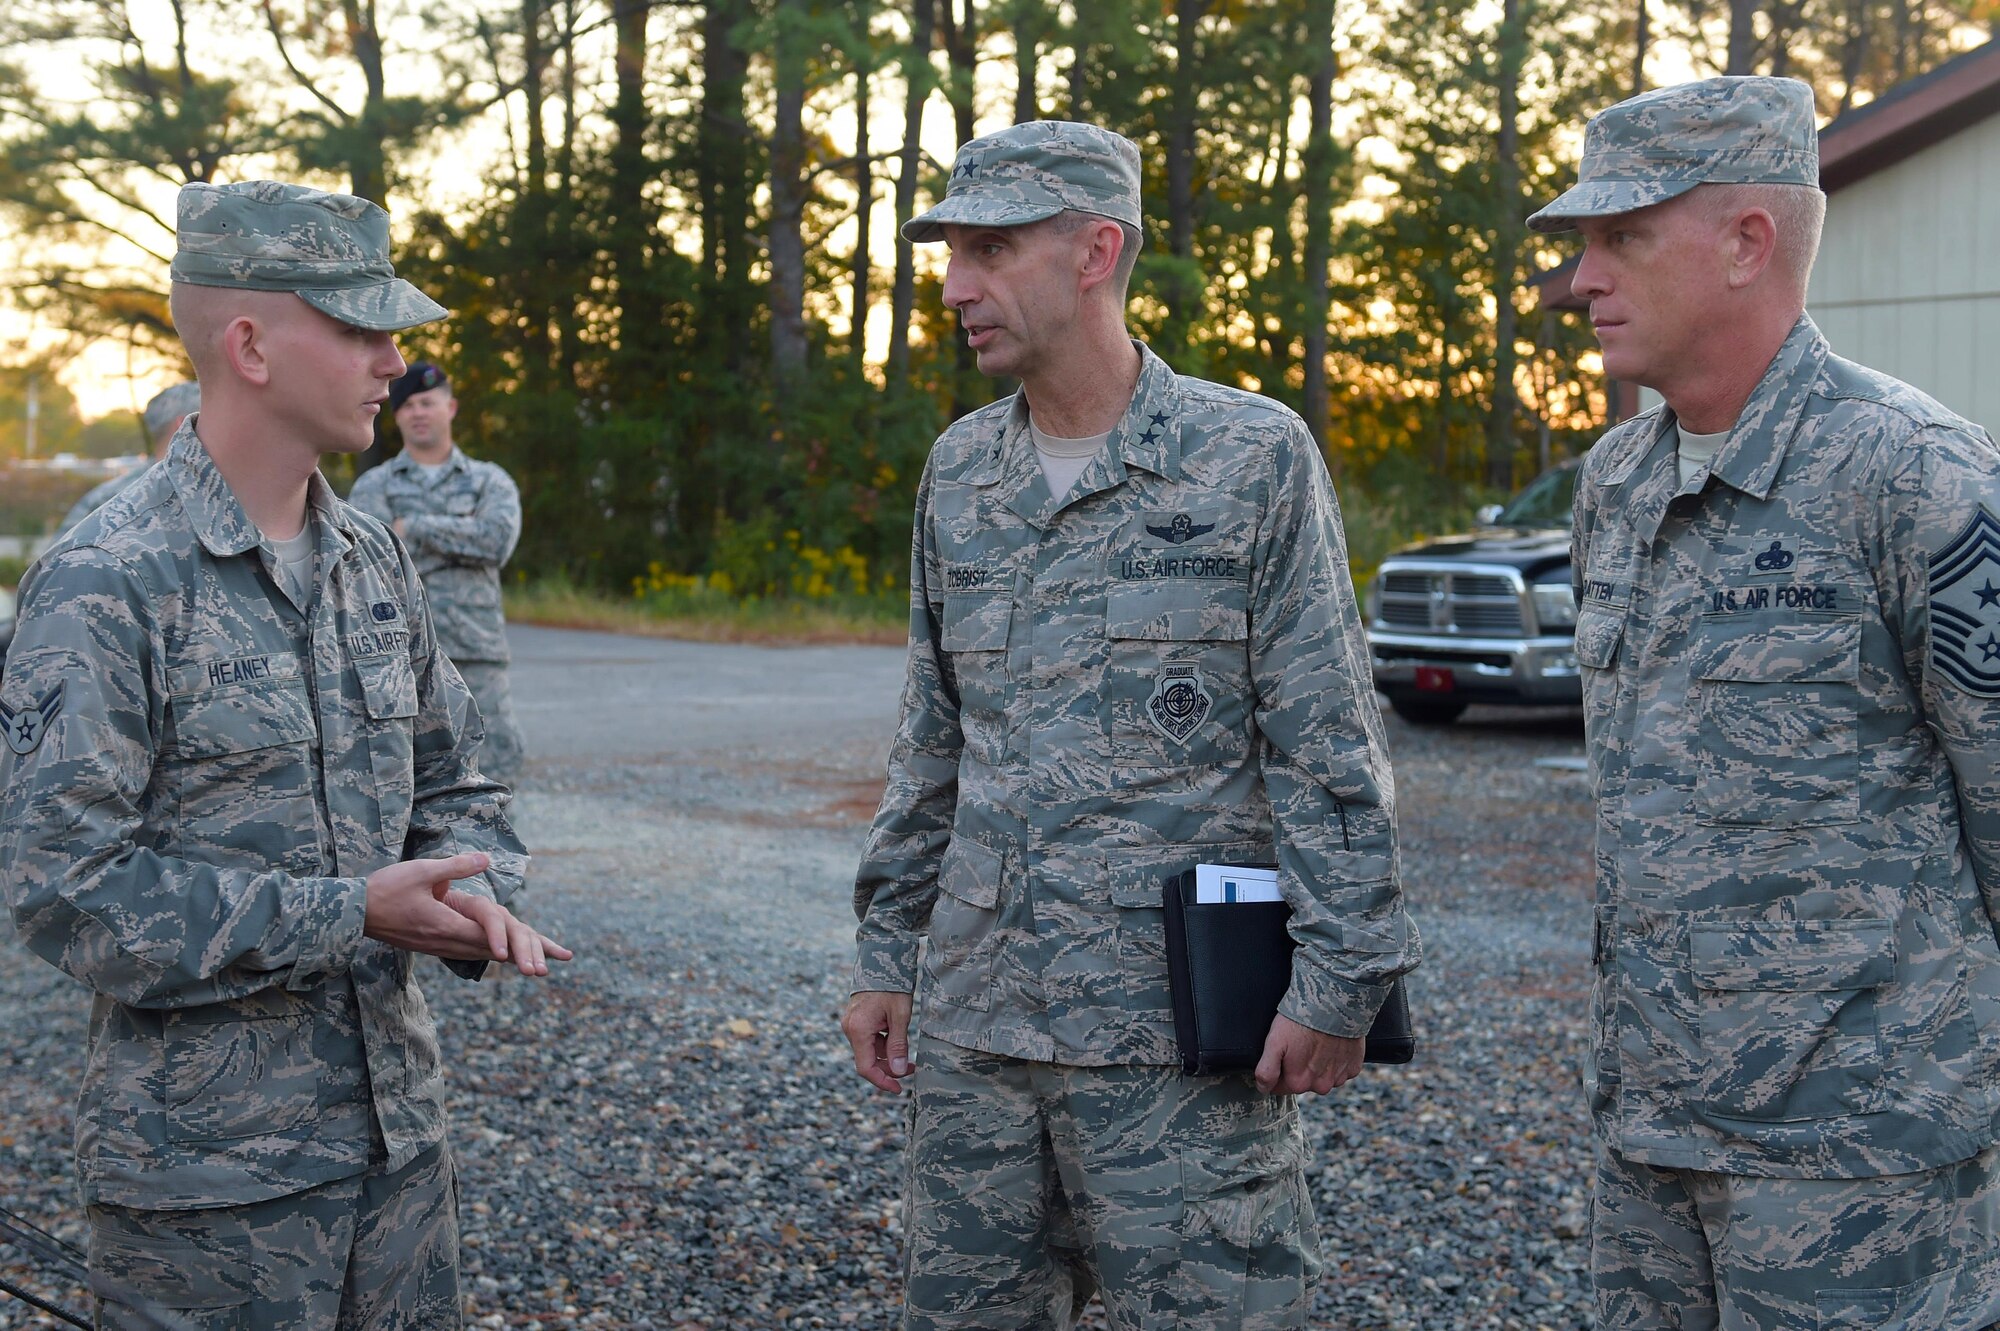 U.S. Air Force Airman 1st Class Alousha Heaney, 633rd Force Support Squadron services journeyman, briefs Maj. Gen. Scott Zobrist, 9th Air Force commander, and Chief Master Sgt. Frank Batten, 9th AF command chief, during a visit at Joint Base Langley-Eusits, Va., Oct. 18, 2016. Heaney showed them a full service single pallet expeditionary kitchen set up for a 633rd Medical Group exercise. (U.S. Air Force photo by Senior Airman Kimberly Nagle)  